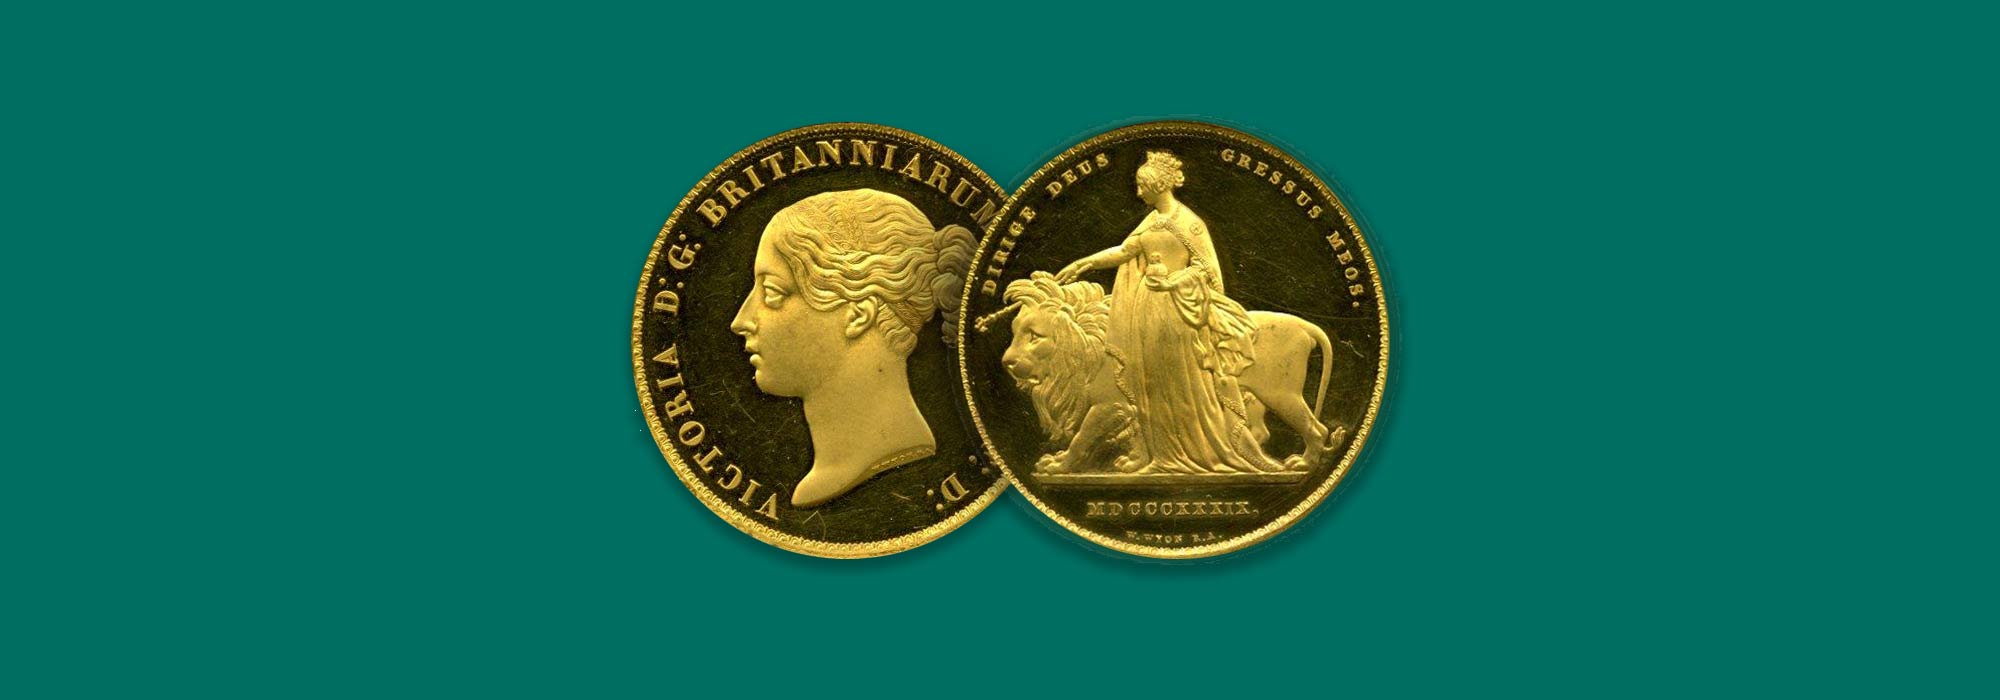 valuable coins from around the world